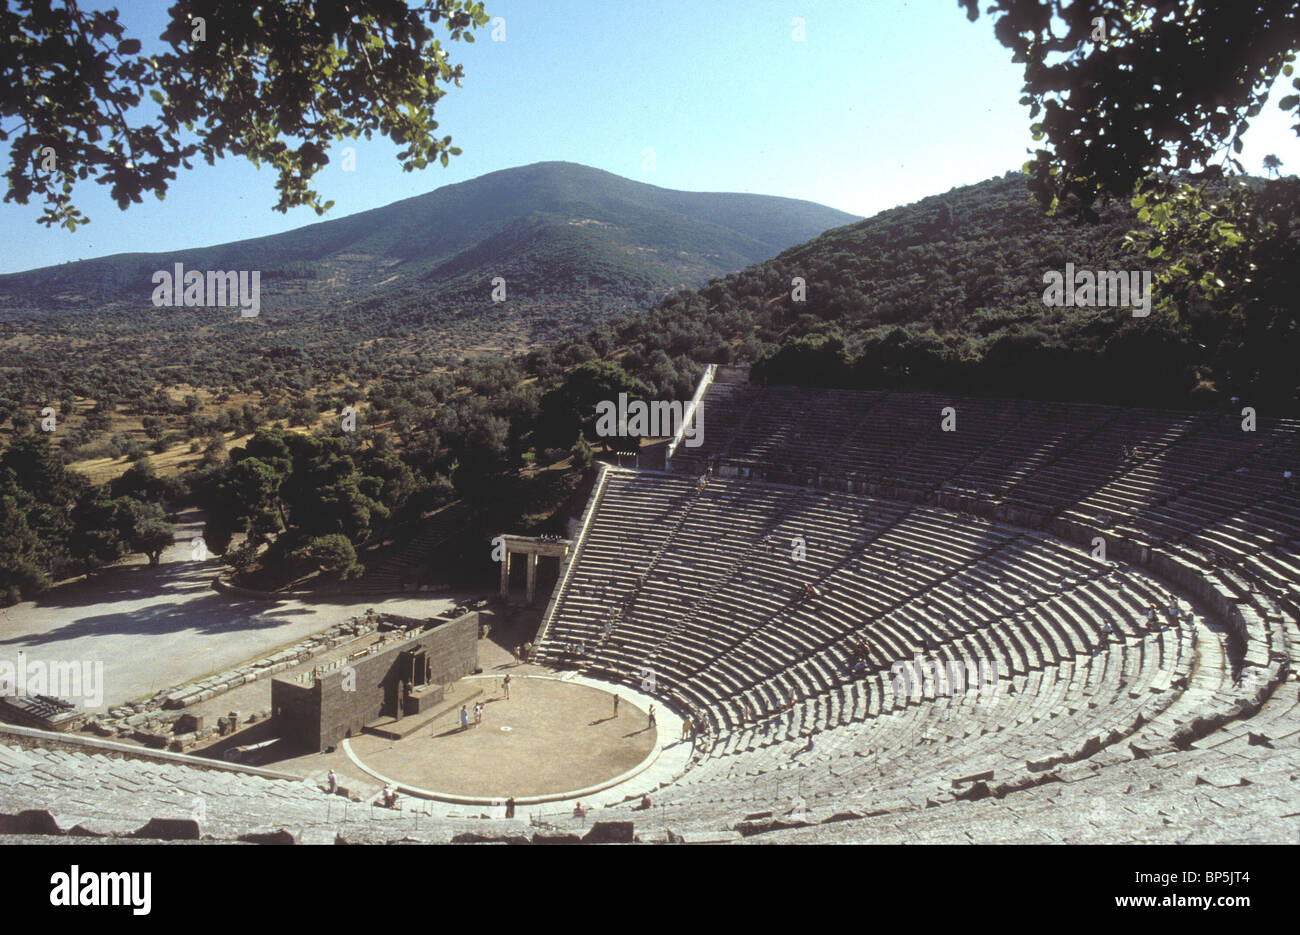 EPIDAURUS - IMPORTANT COMMERCIAL CENTRE IN ANCIENT GREECE ON THE EASTERN COAST OF THE ARGOLID IN THE NORTHEASTERN PELOPONNESE; Stock Photo